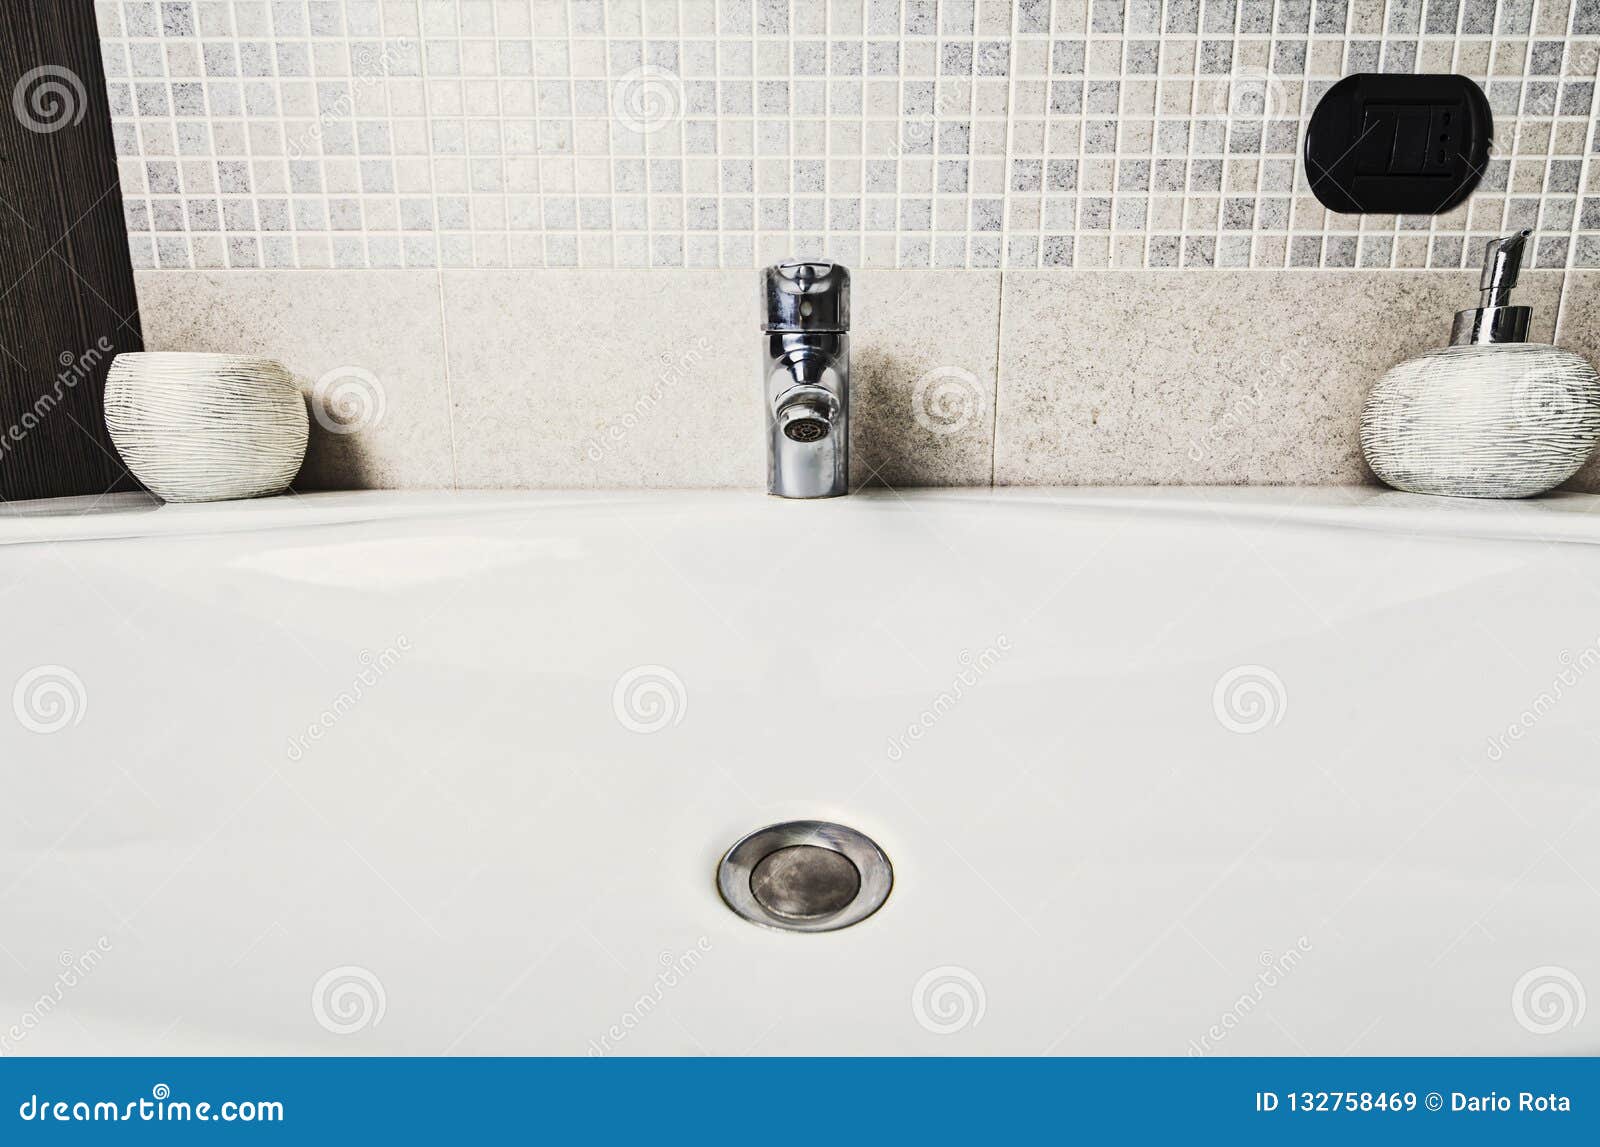 Spa Sink And Faucet Stock Image Image Of Serpentine 132758469